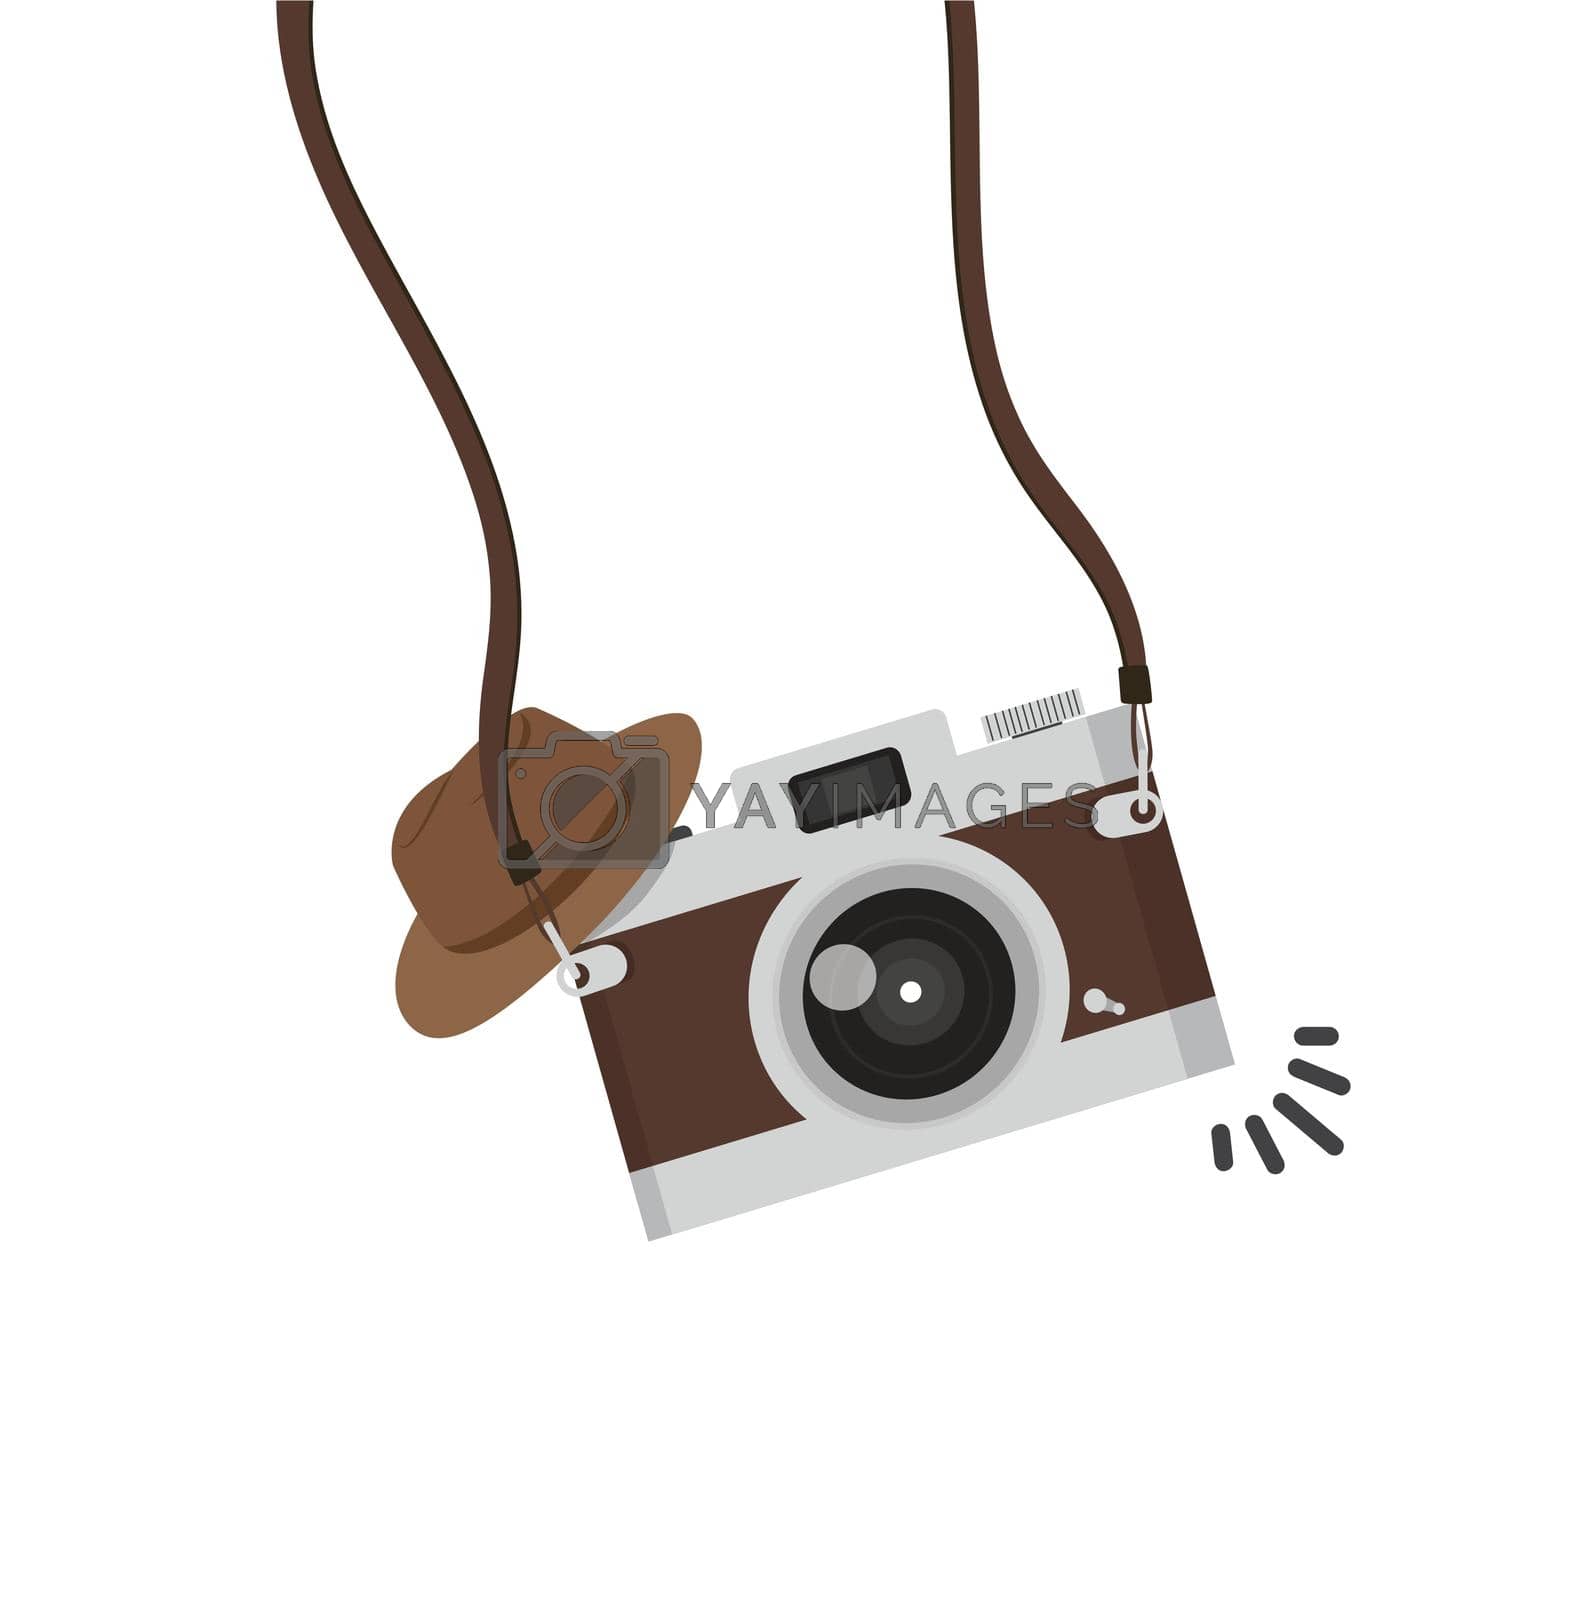 Royalty free image of hanging camera with hat vector by focus_bell